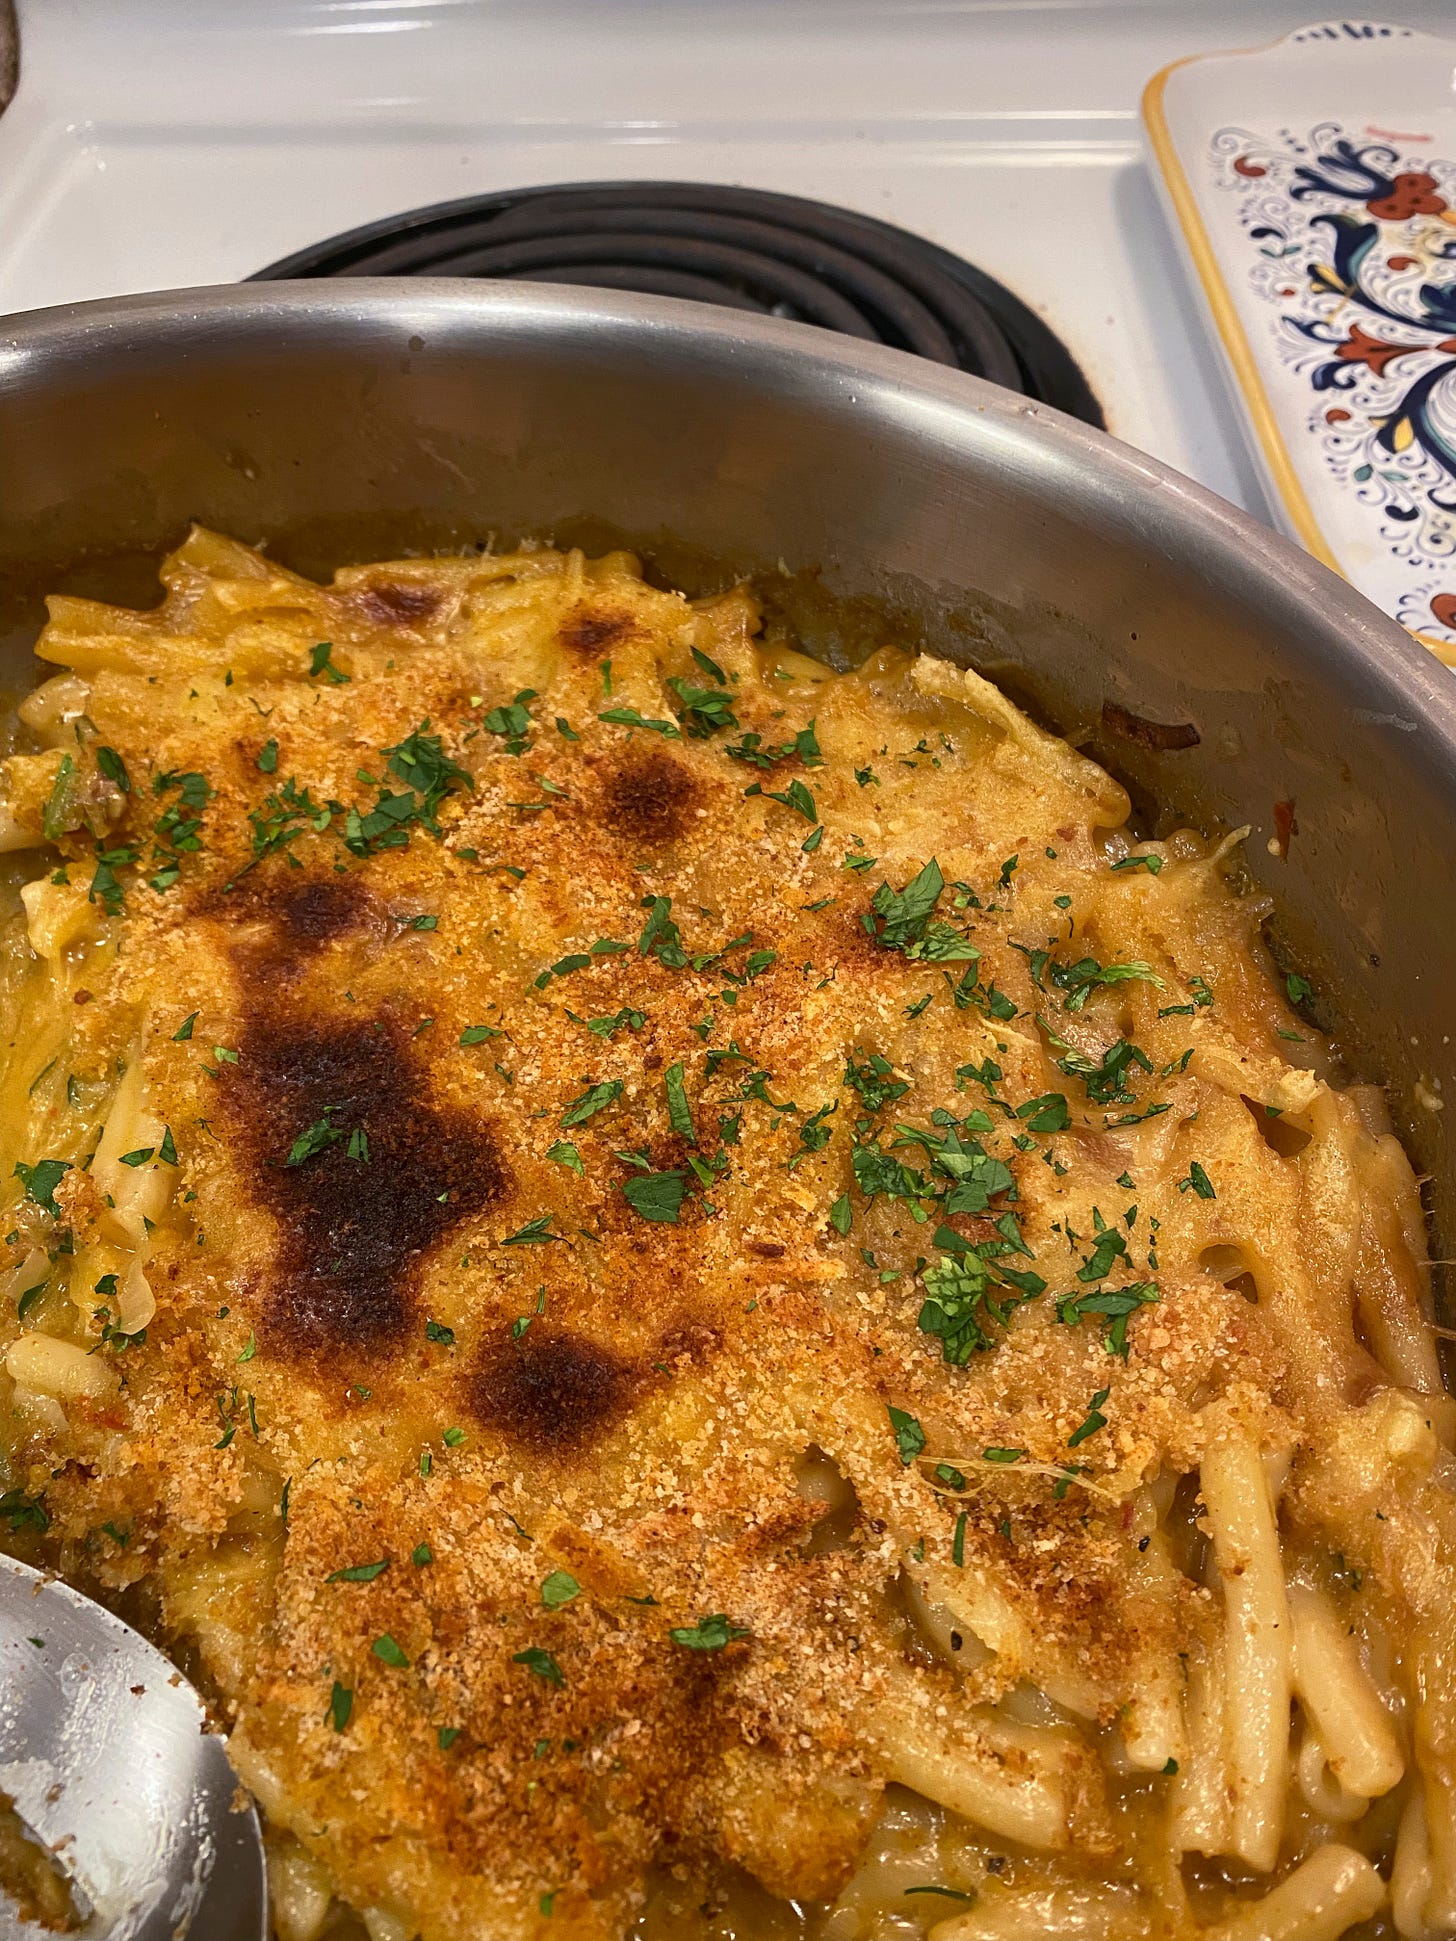 A stainless steel pan of mac & cheeze, with browned breadcrumbs and chopped parsley on top. A serving spoon is just visible in the lower left corner of the frame.